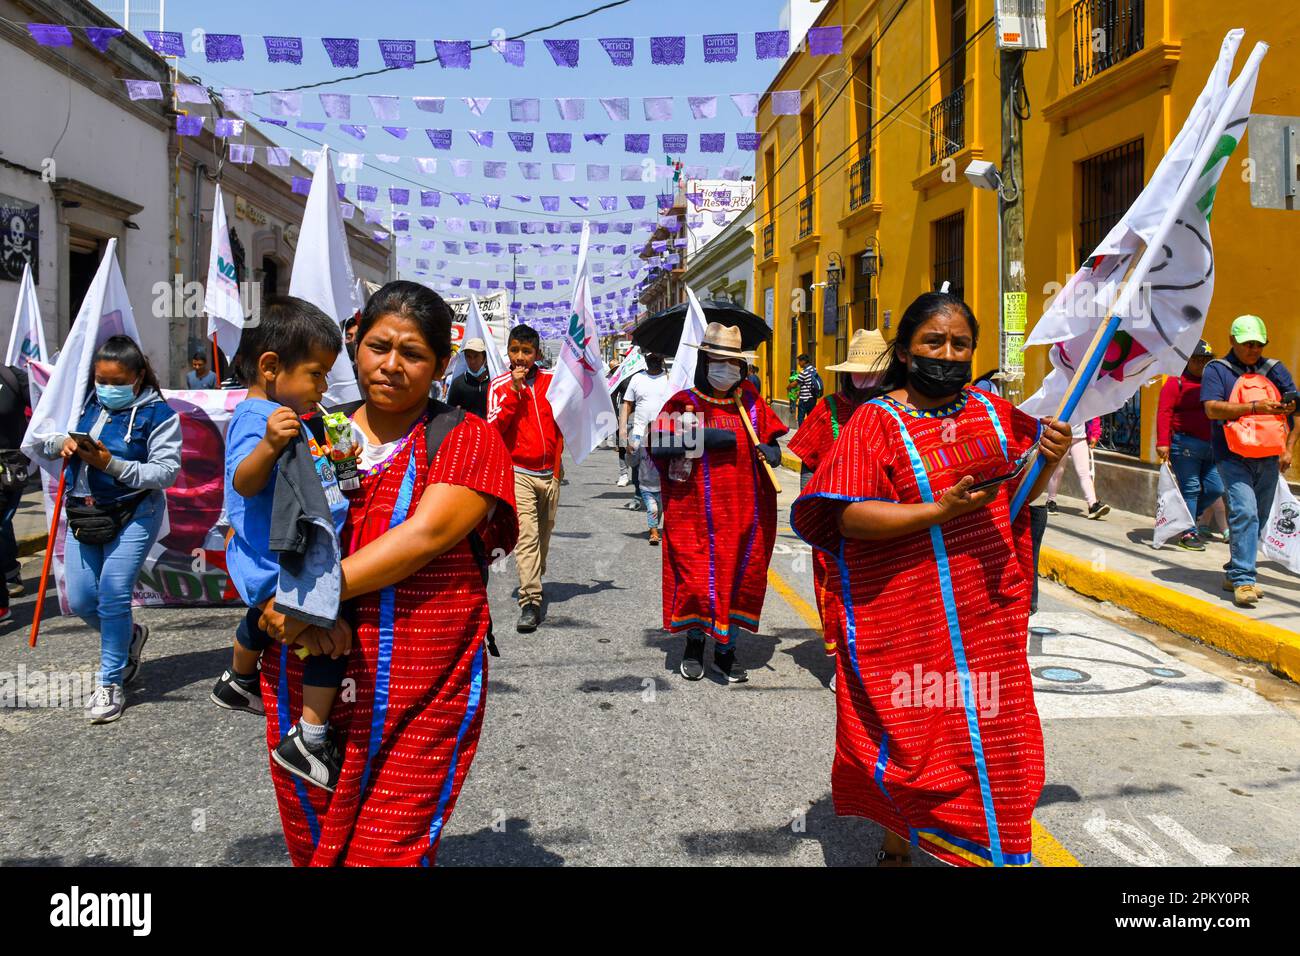 Indigenous people belonging a Union protest in Oaxaca city Mexico. Oaxaca is known as a hub for social justice and activism . Stock Photo